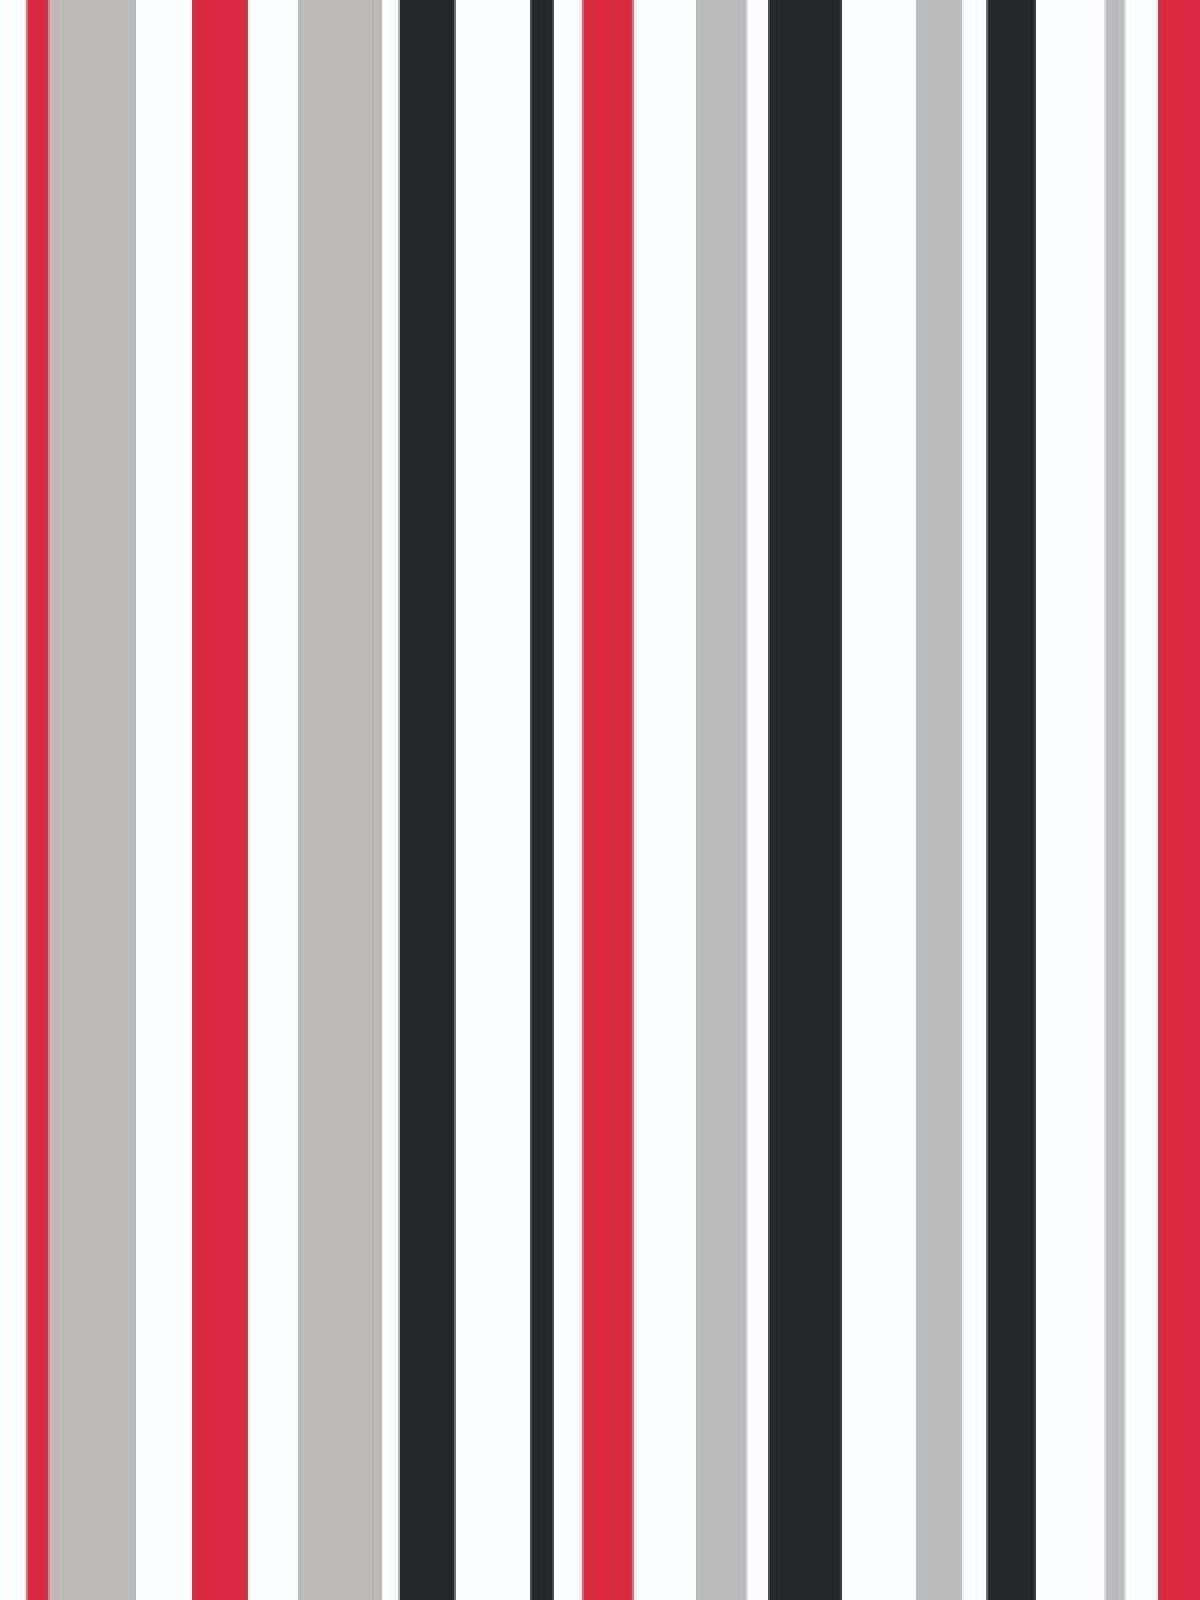 Download A Red, Black And White Striped Wallpaper | Wallpapers.com